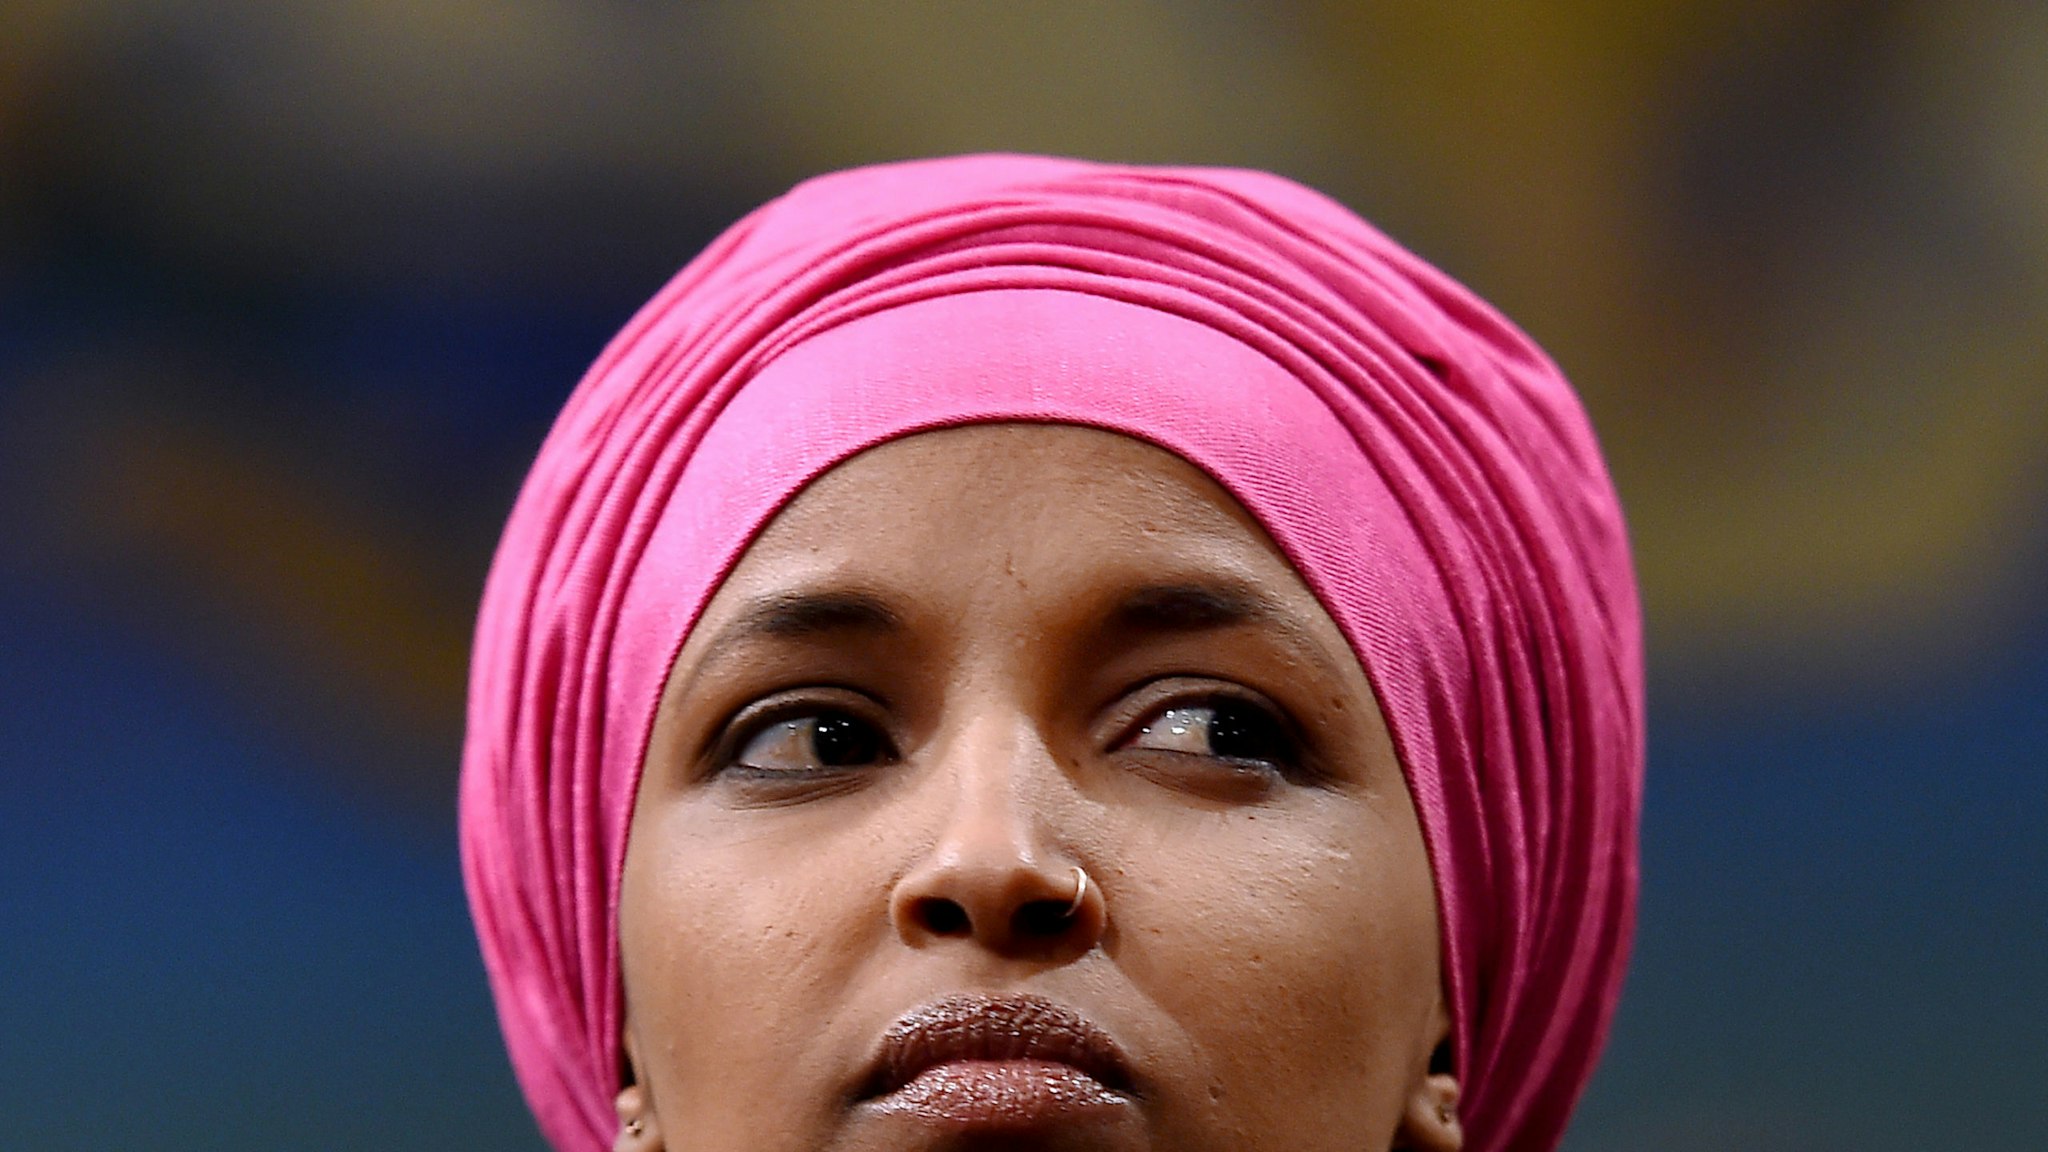 Representative Ilhan Omar (D-Minnesota) attends a press conference with a delegation of Brazilian Congresswomen to discuss human rights and climate justice on February 26, 2020 on Capitol Hill in Washington, DC.